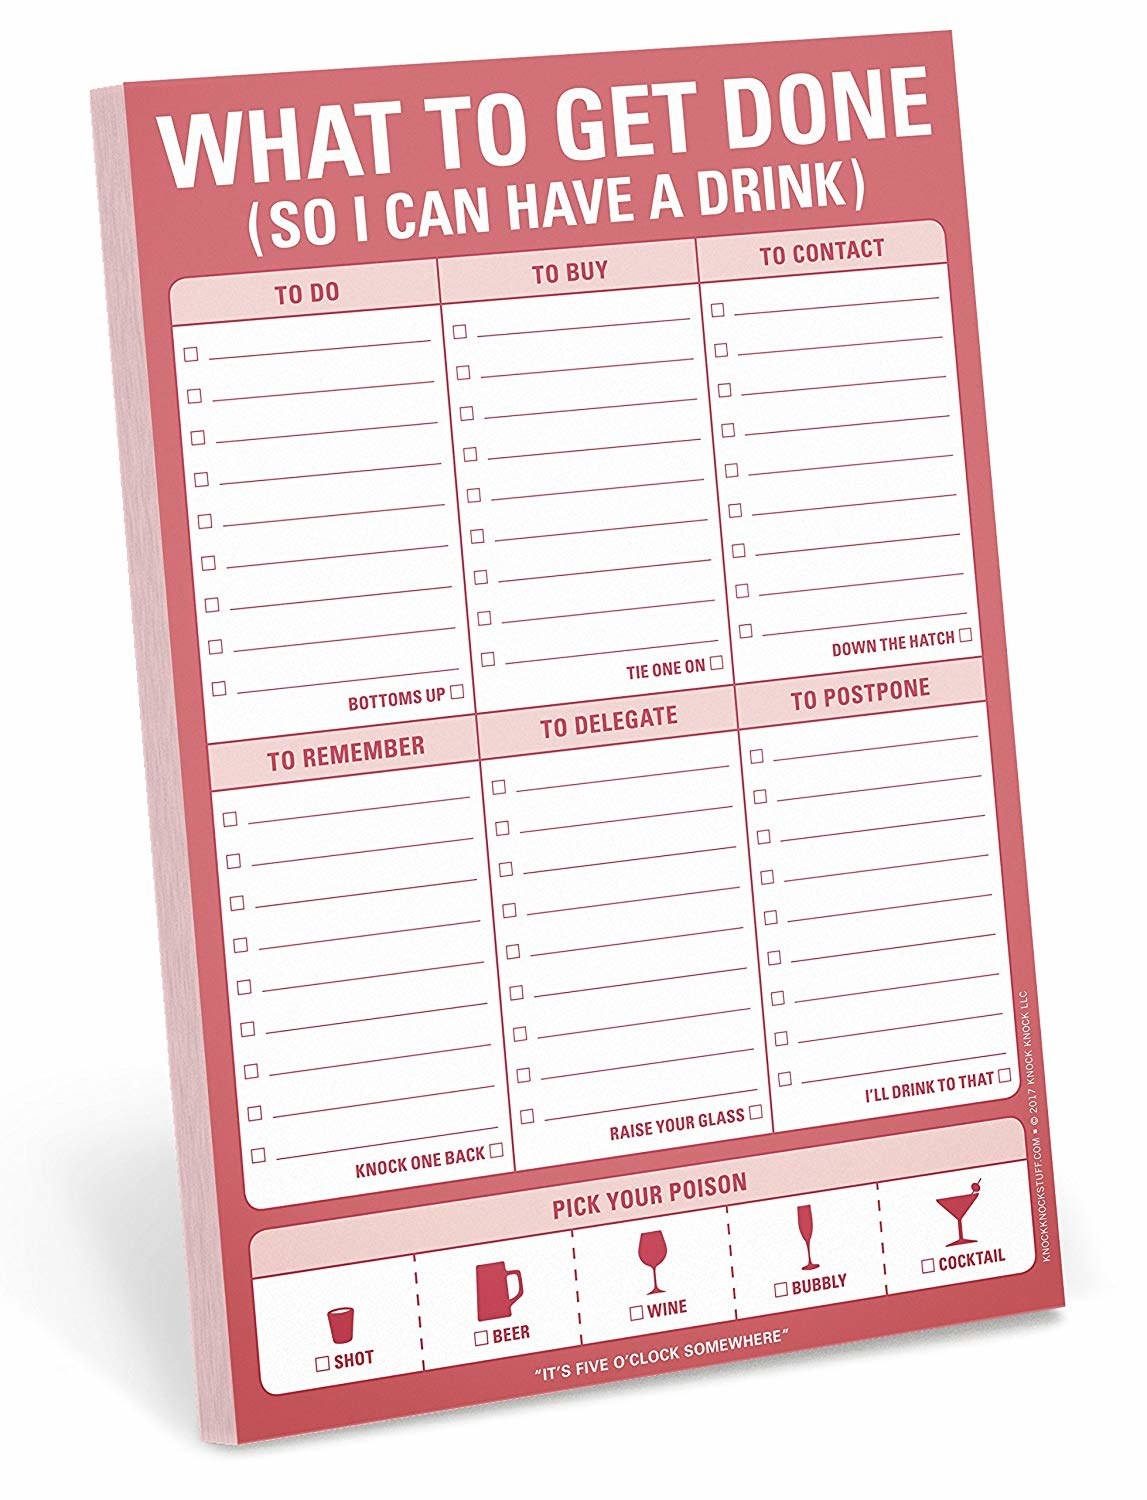 The pad that says &quot;What I have to get done do I can have a drink&quot;